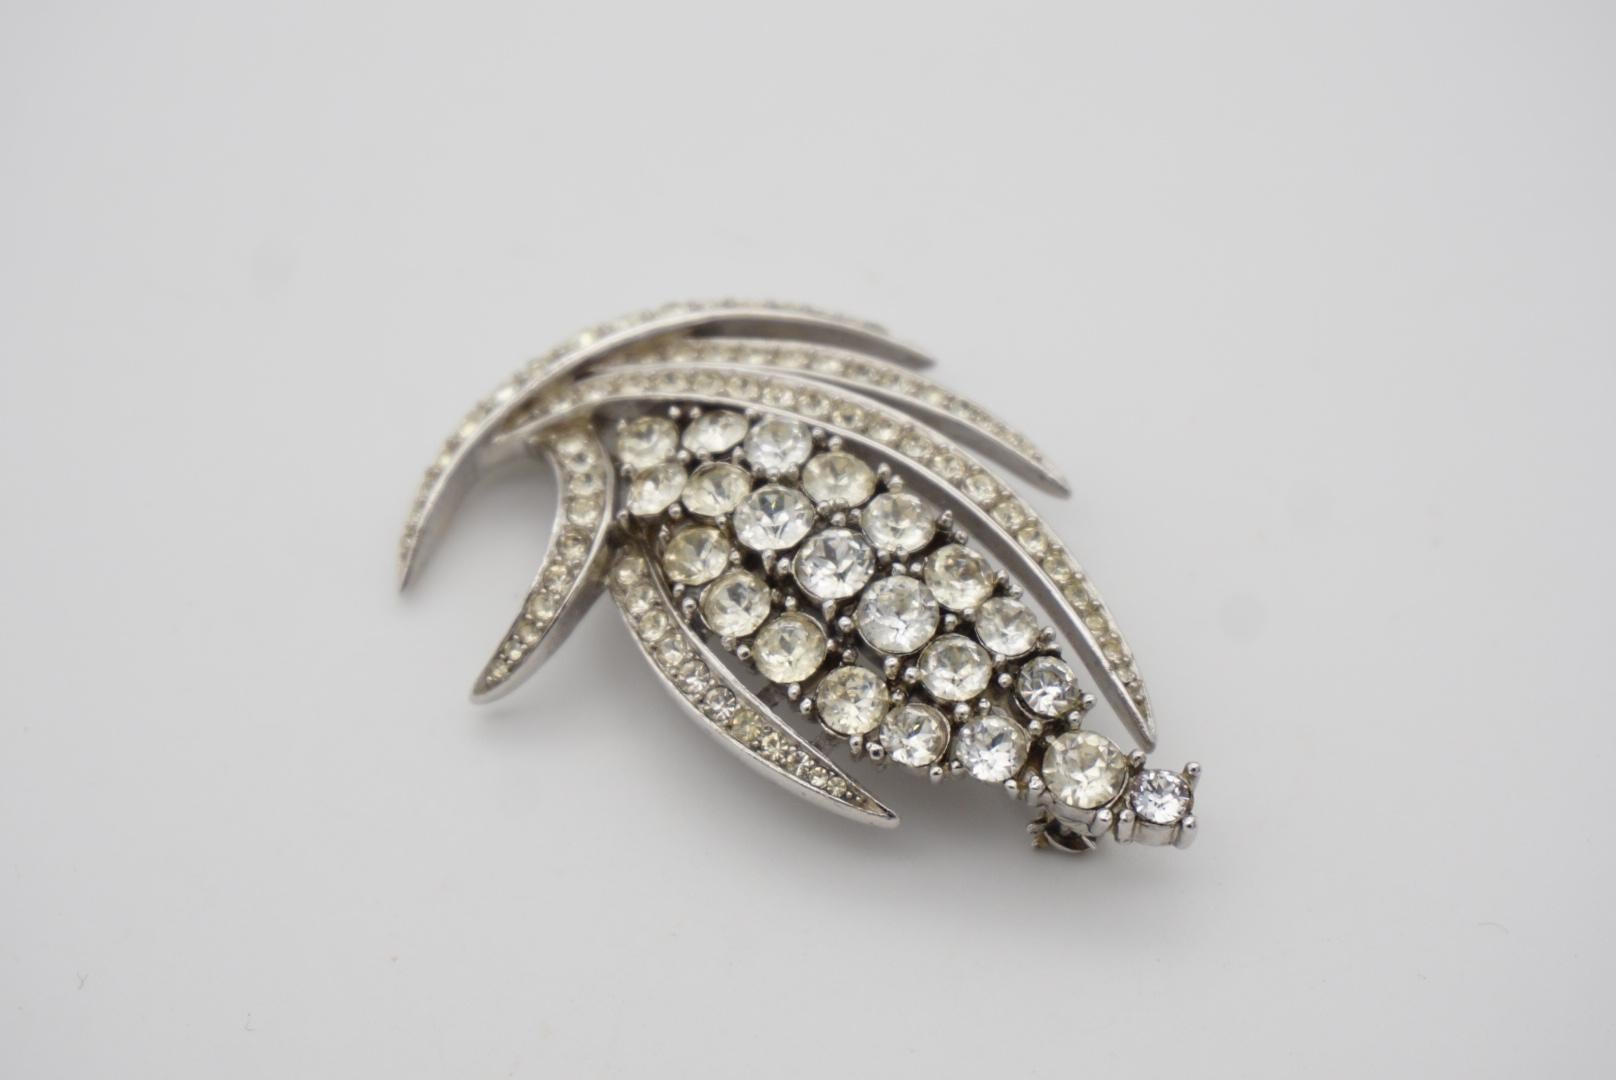 Crown Trifari Vintage 1950s Flower Leaf Corn Wheat White Whole Crystals Brooch For Sale 3